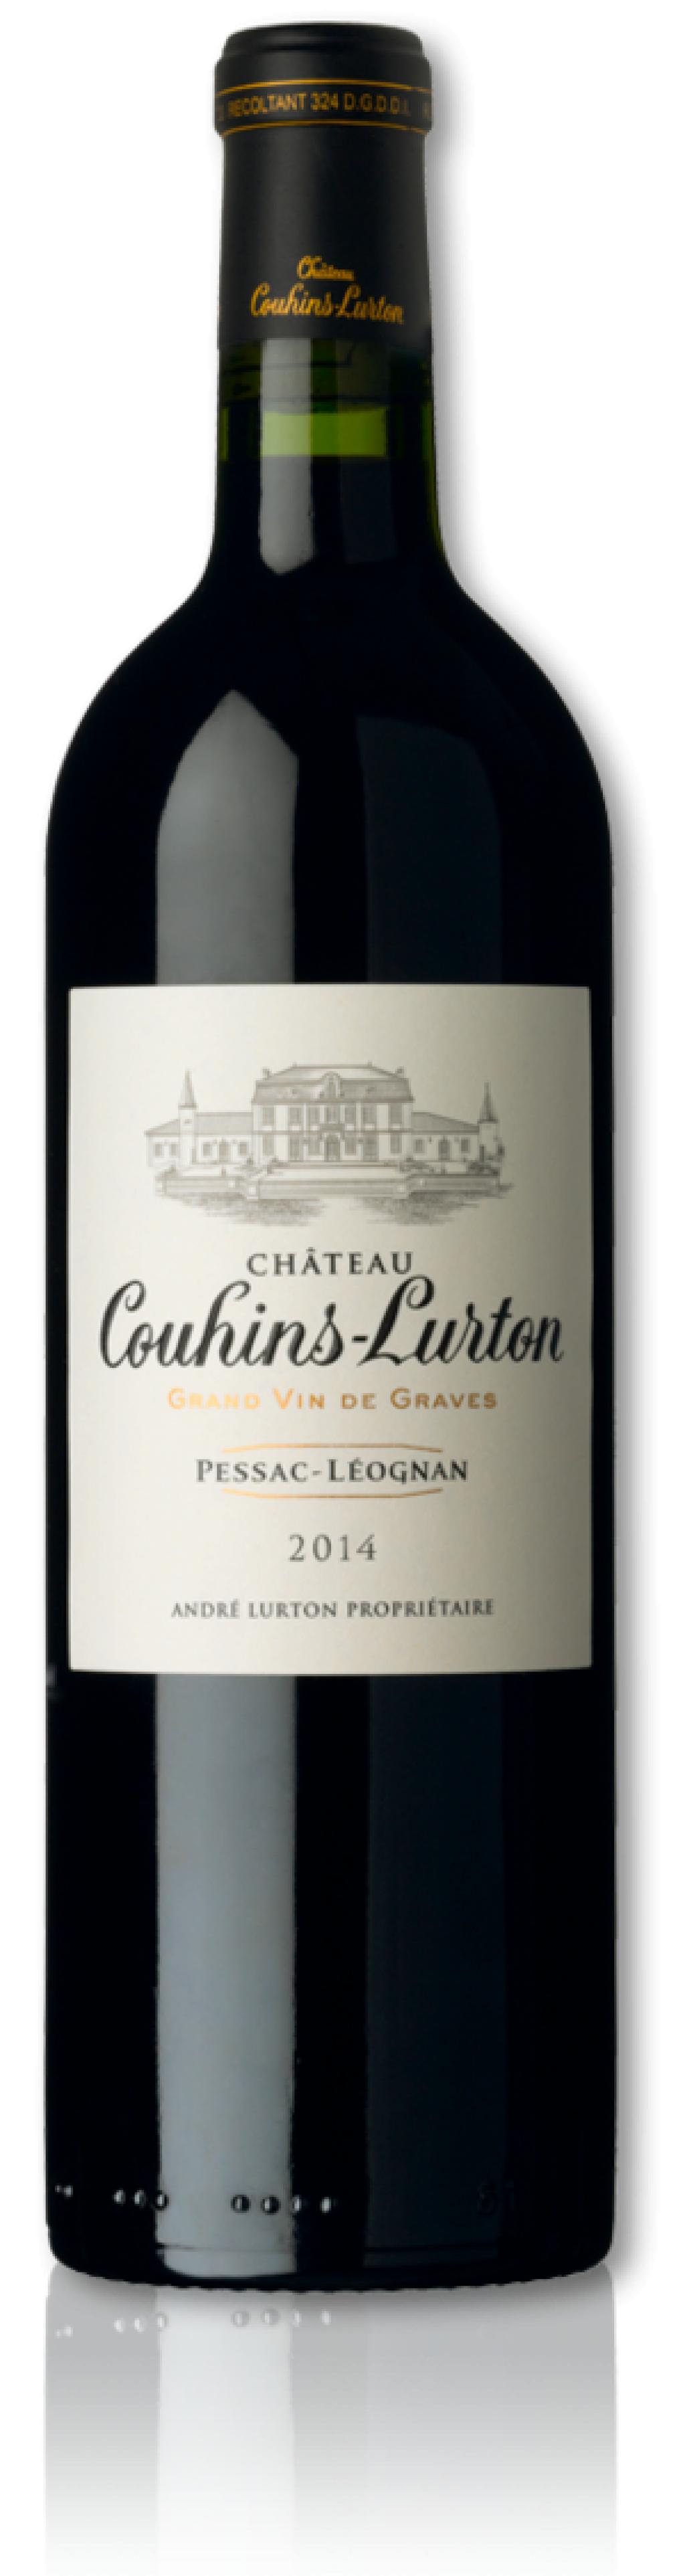 Château Couhins-Lurton Red Chateau : Château Couhins-Lurton Even if Couhins-Lurton is only Cru Classé in white, André Lurton and his team make it a point to develop a very noble red wine.